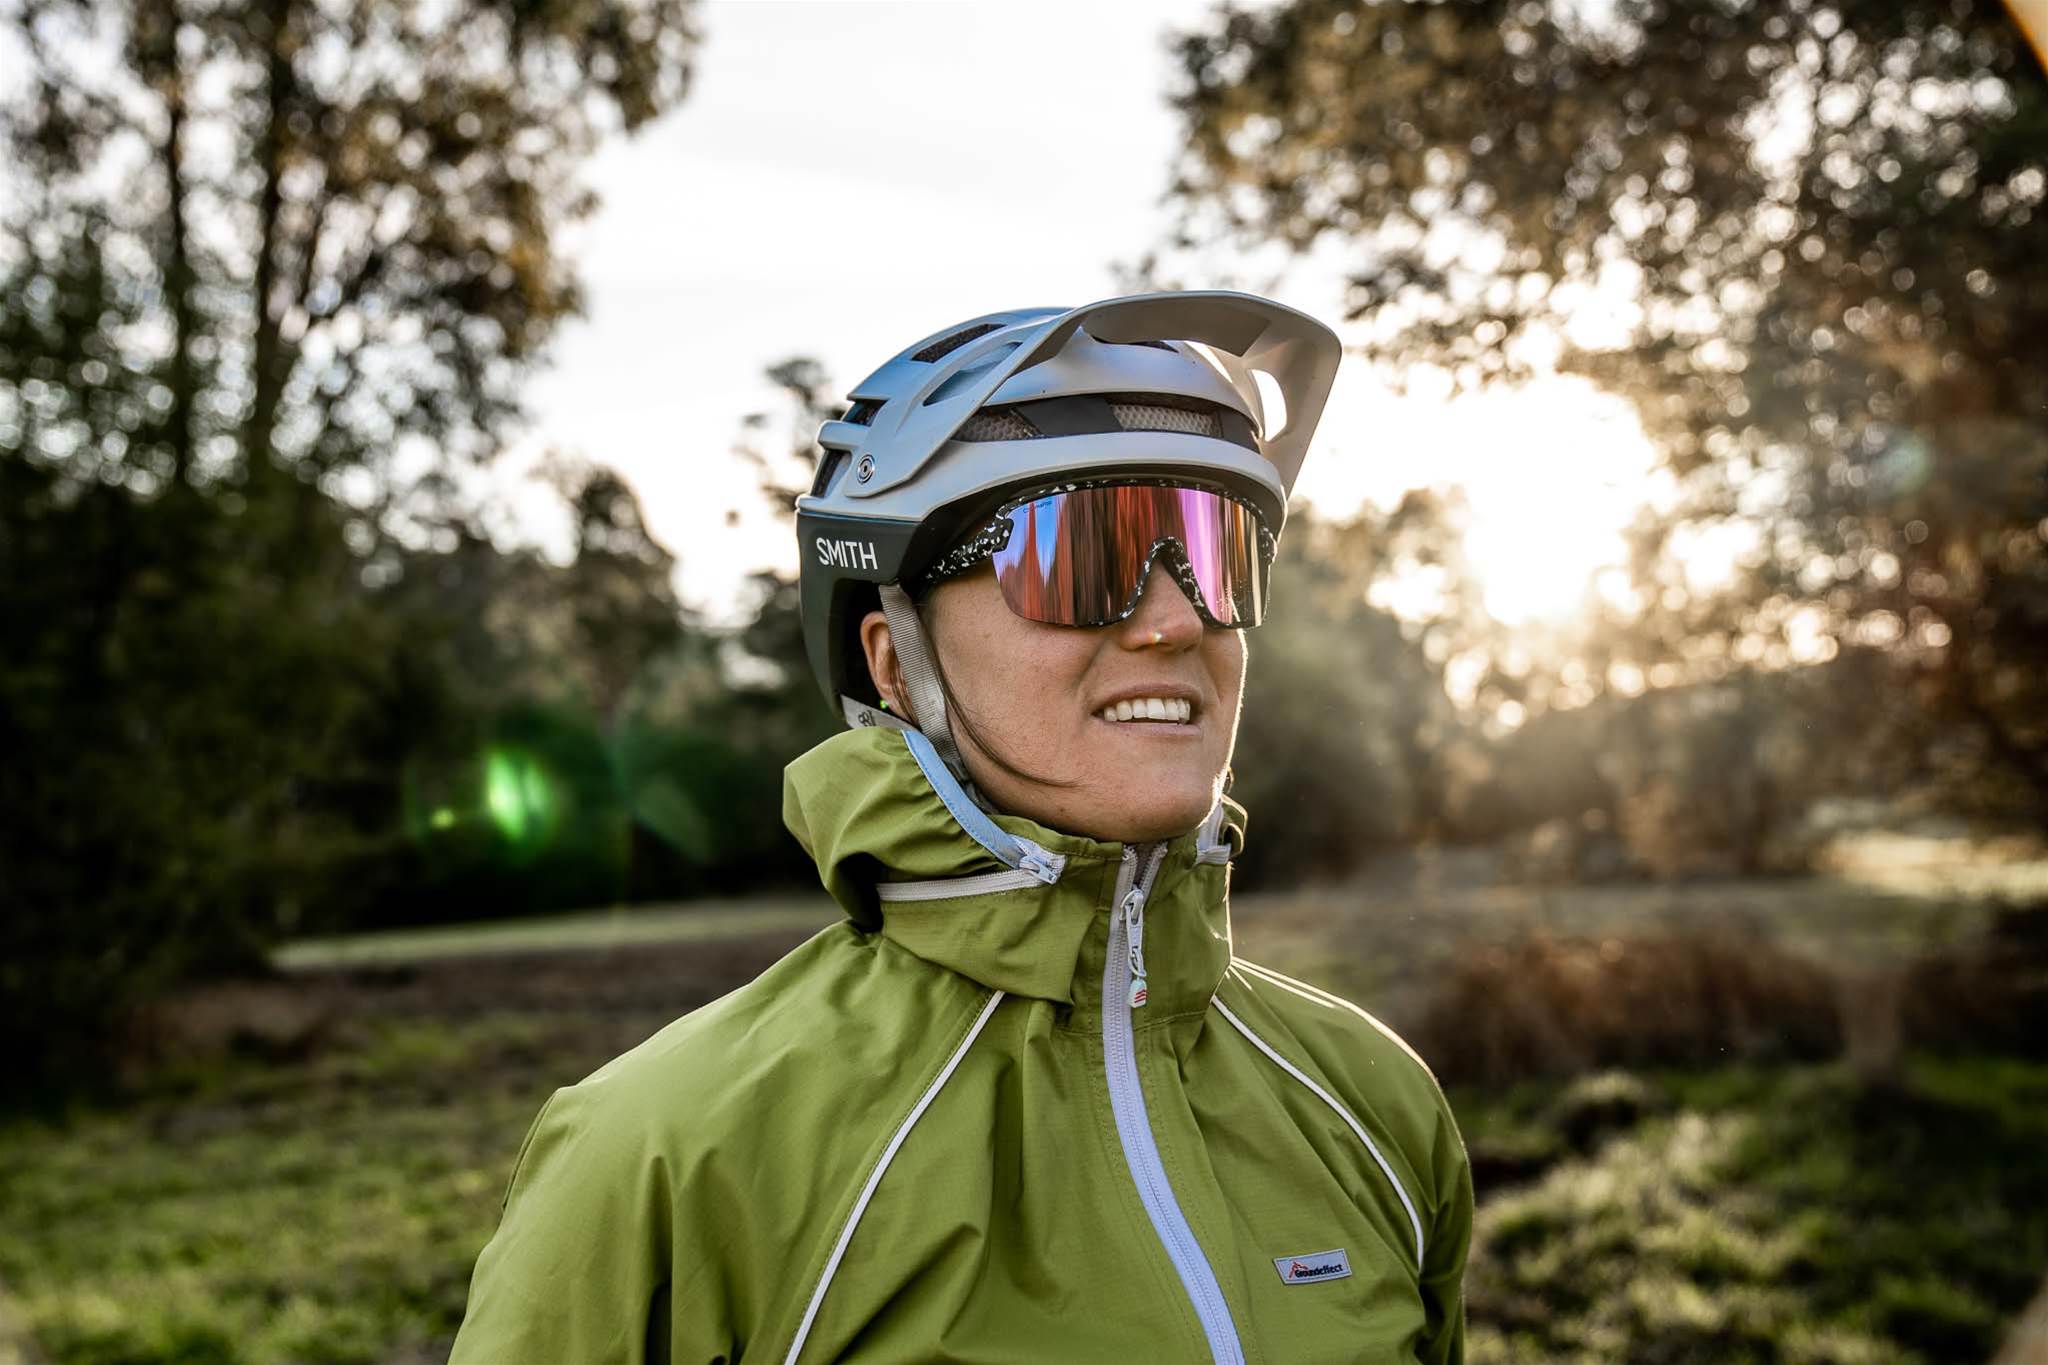 How to wear cycling gear in cold weather – Bicycle Queensland